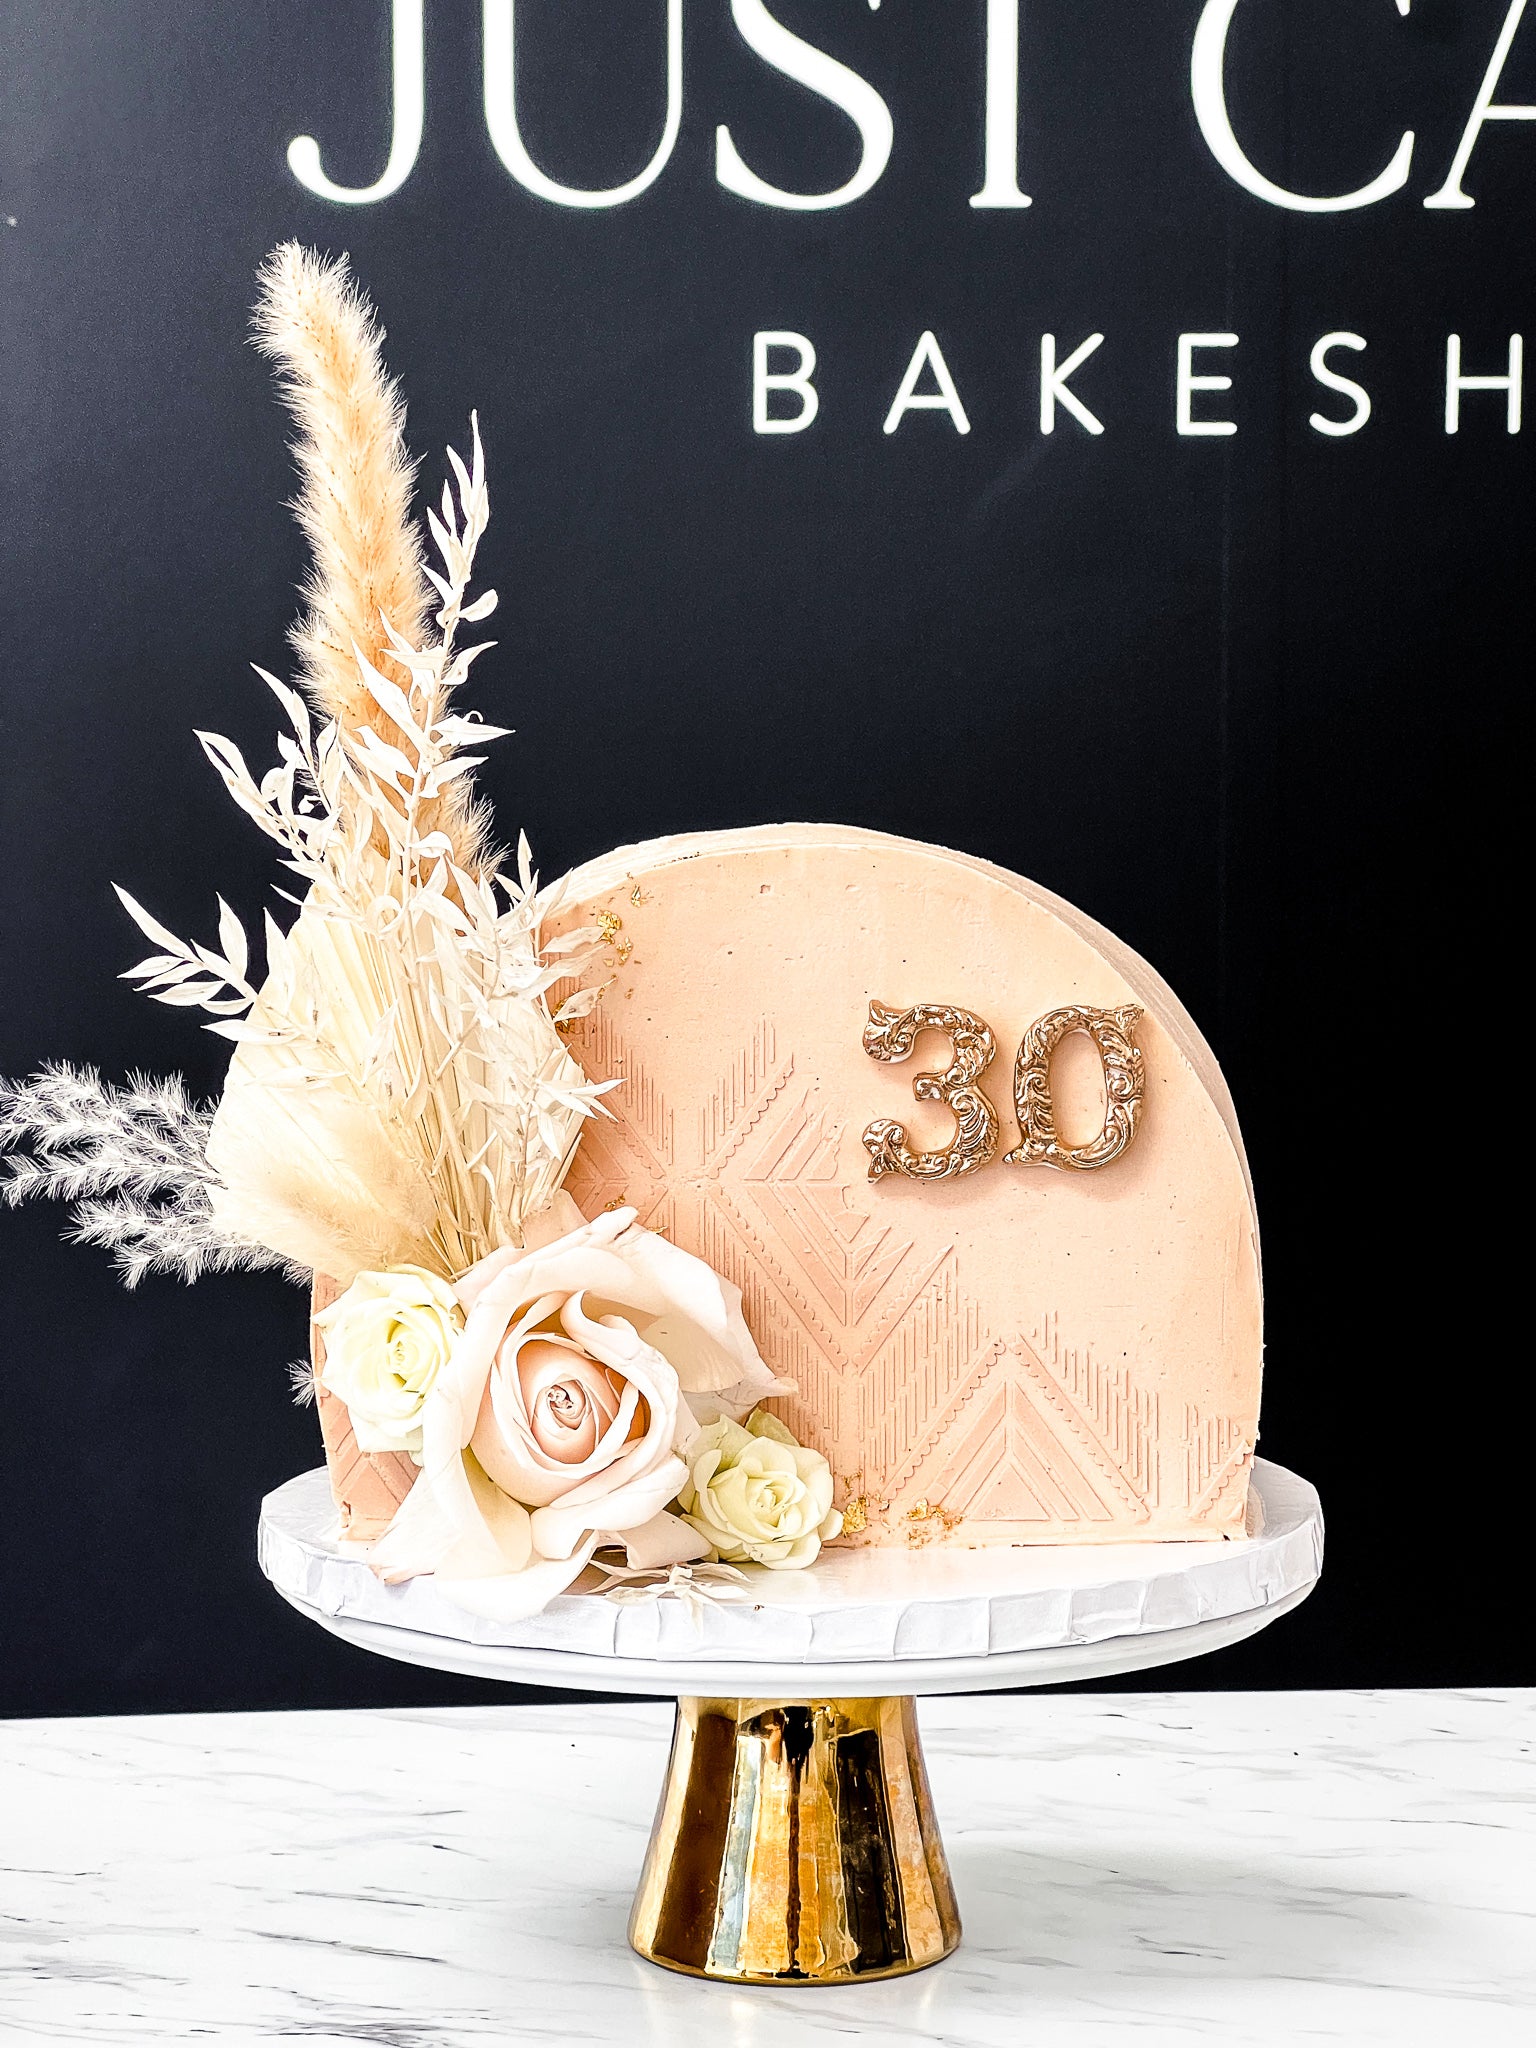 Just Cakes Bakeshop - Plan Events - Reviews